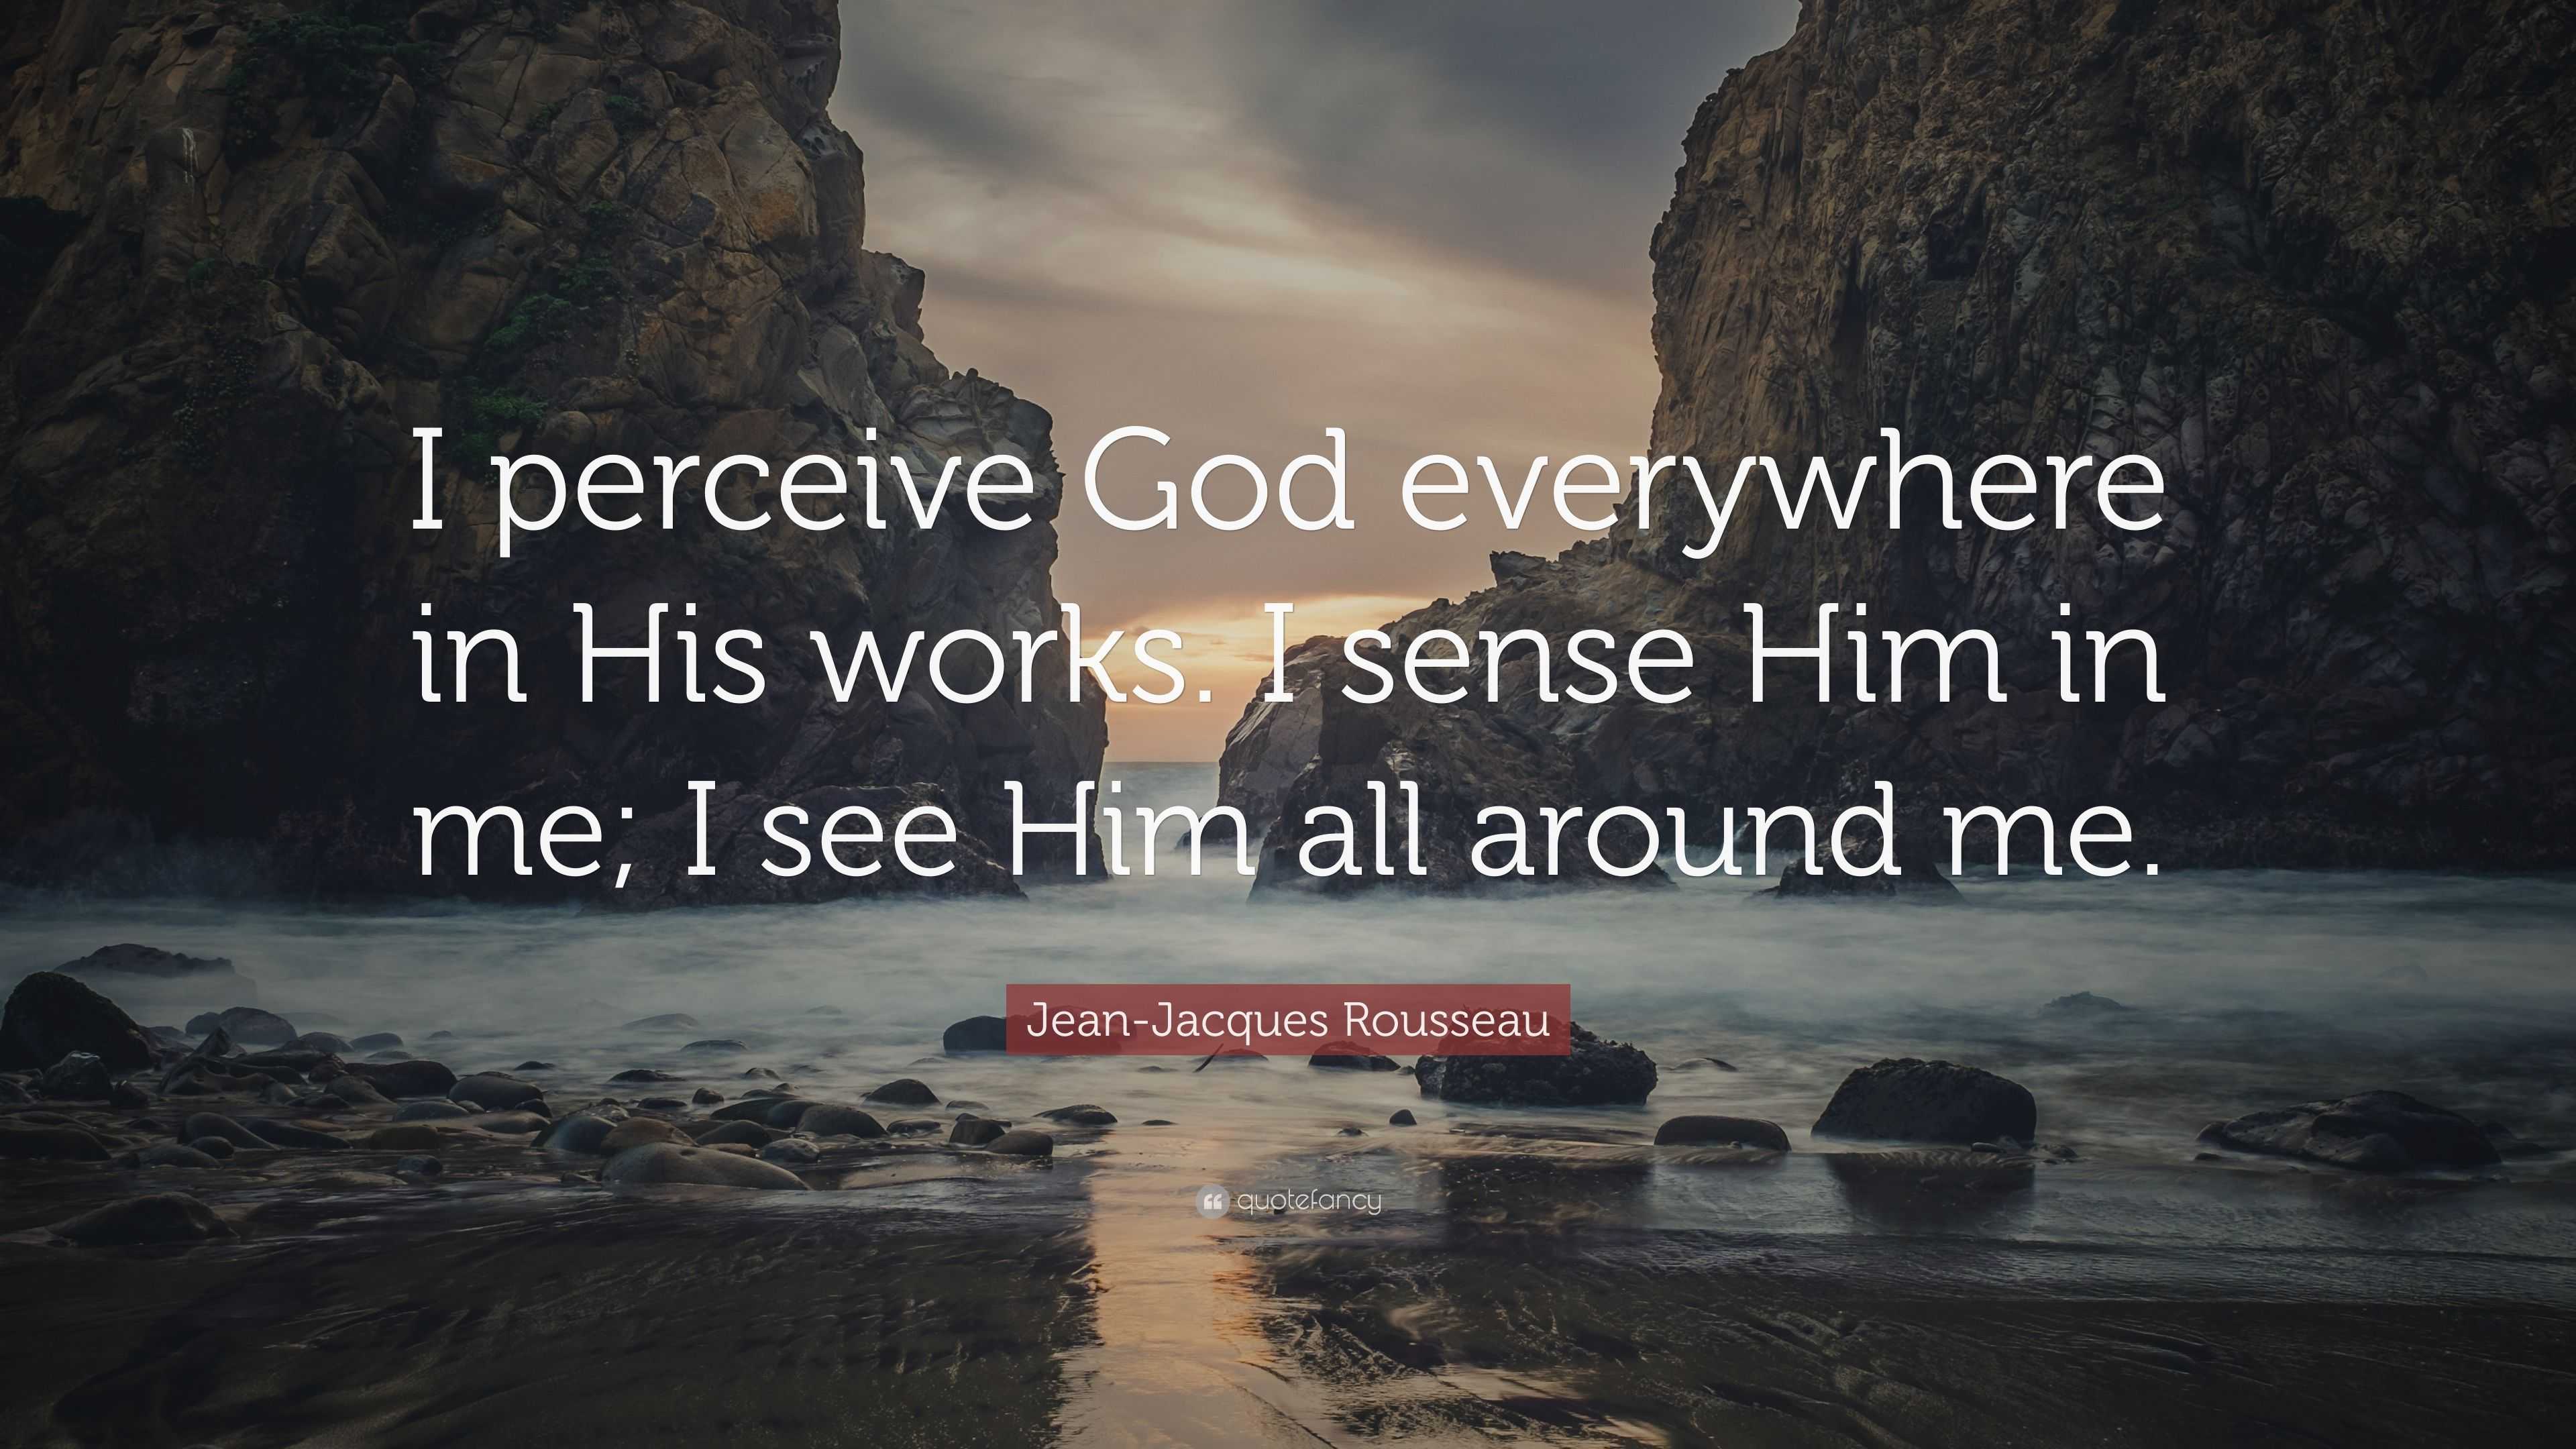 Jean-Jacques Rousseau Quote: “I perceive God everywhere in His works. I  sense Him in me;